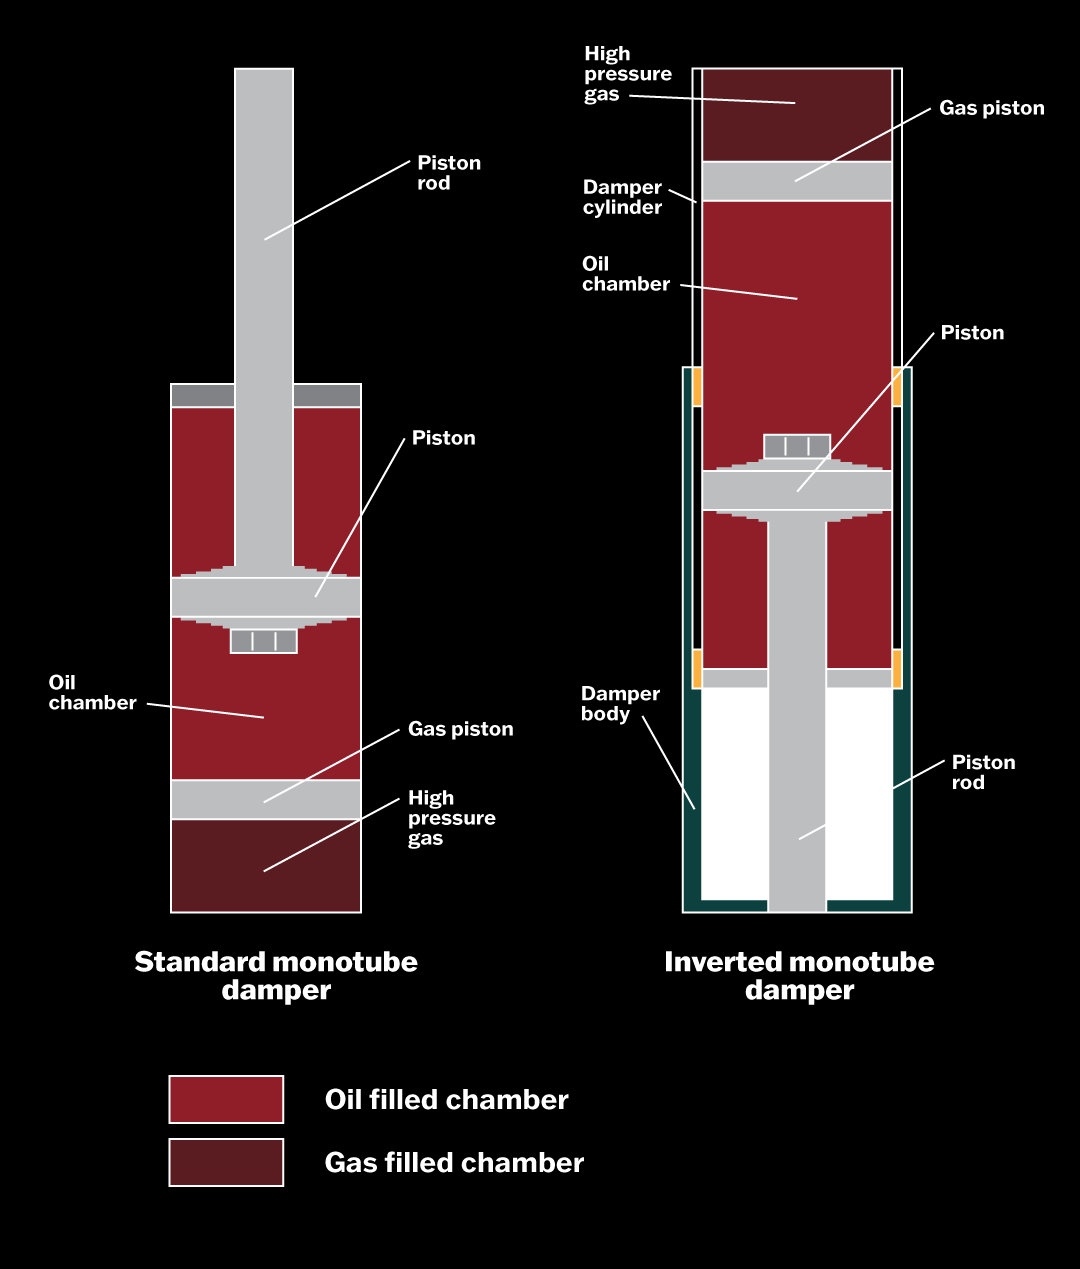 What is an inverted monotube damper?